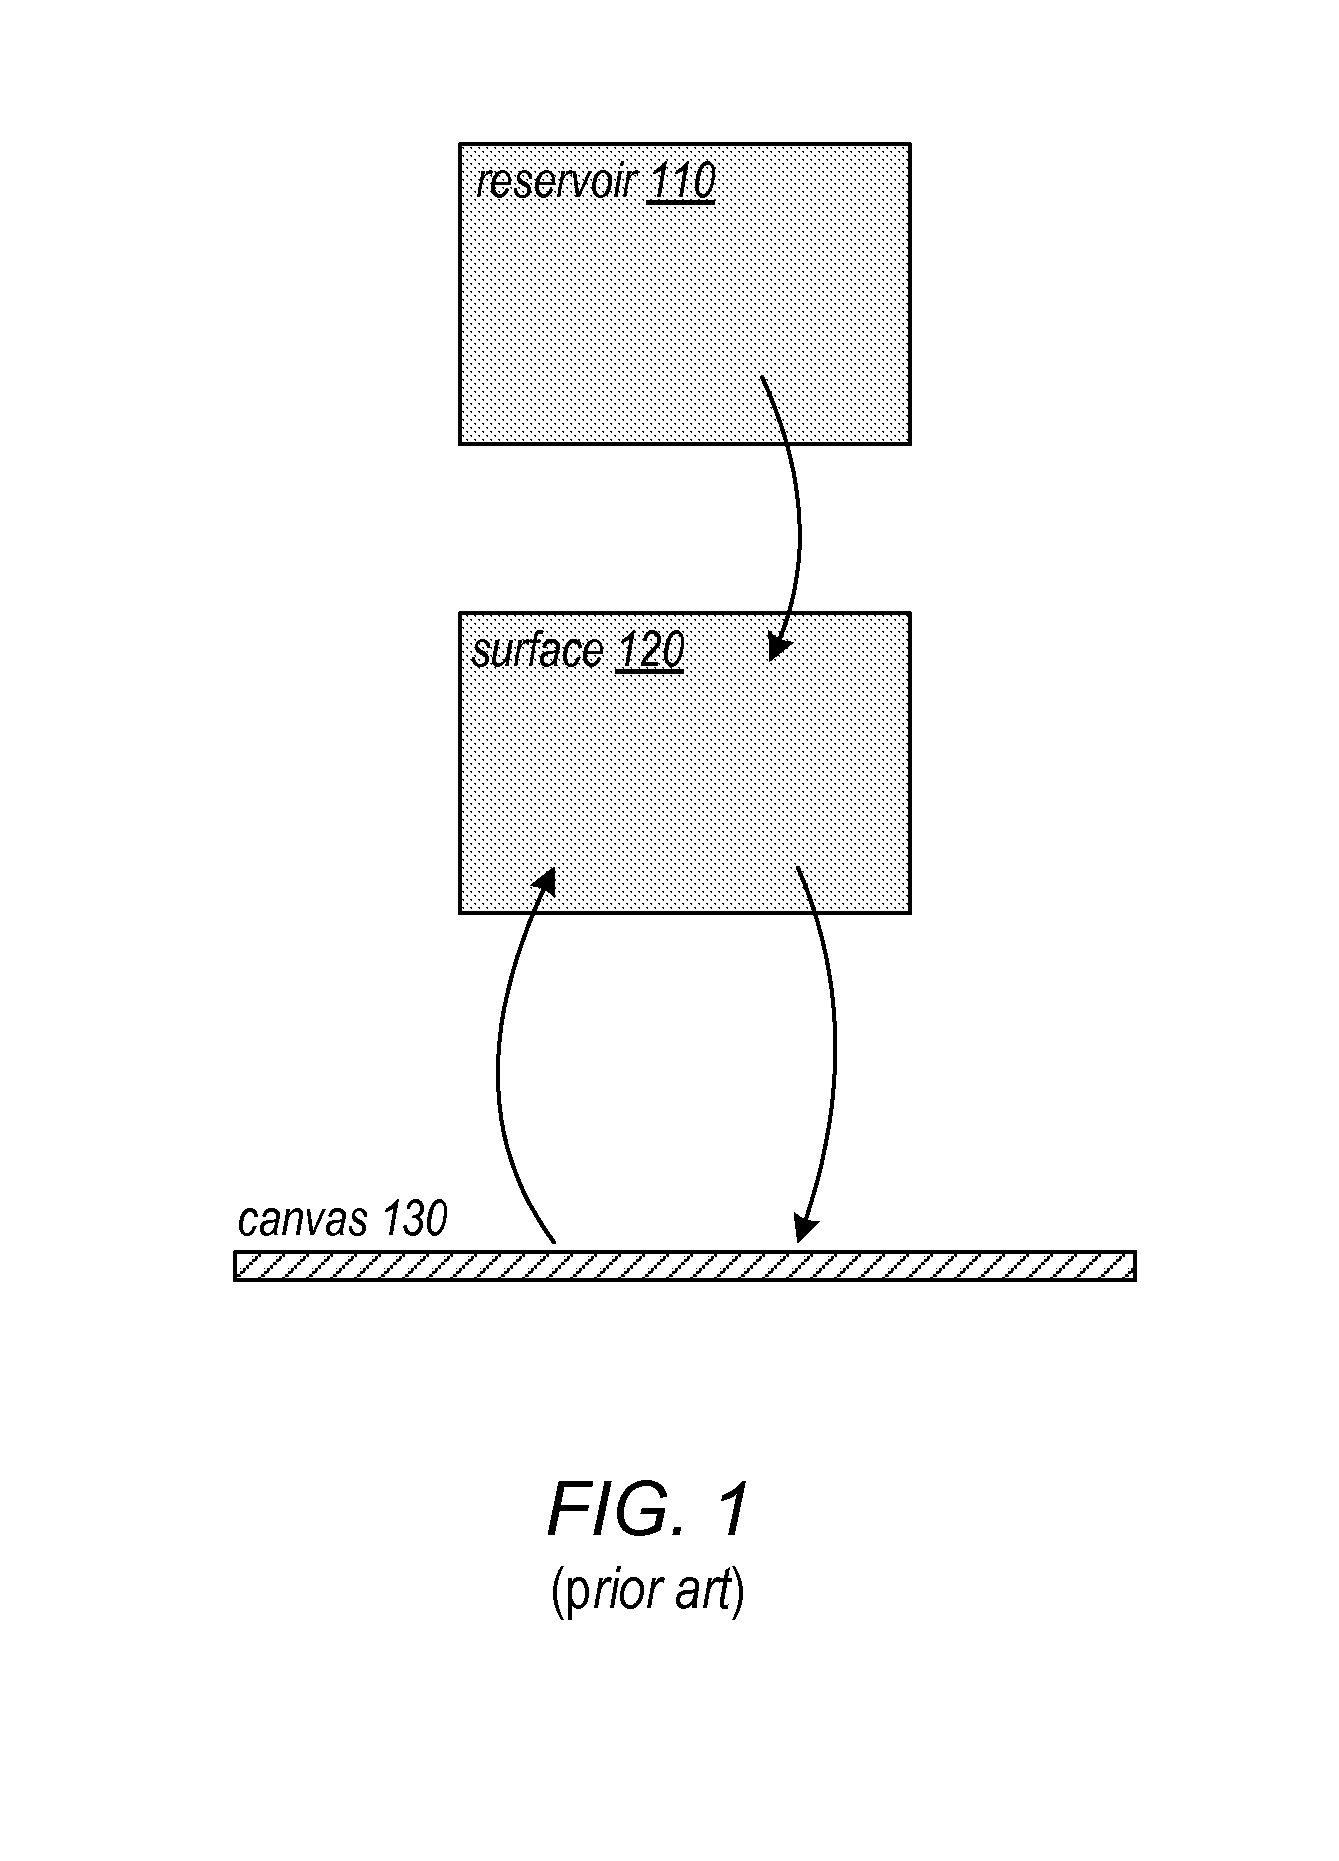 System and Method for Natural Media Painting Using Automatic Brush Cleaning and Filling Modes